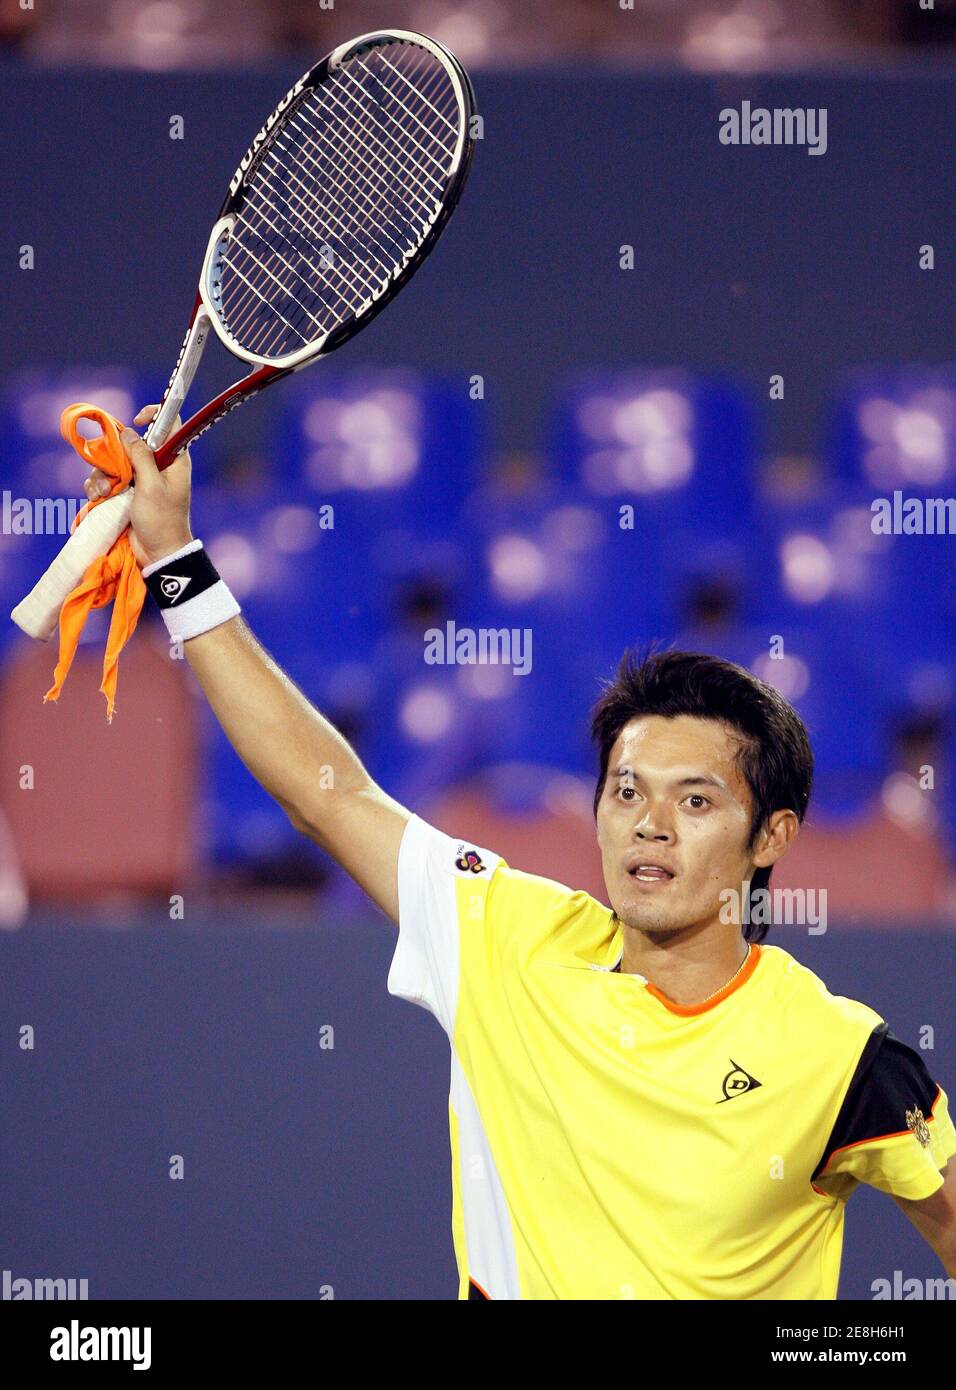 Danai Udomchoke of Thailand waves to fans after his win over Lu Yen-hsun of Taiwan during their final match at the Asian Hopman Cup in Bangkok November 11, 2007. REUTERS/Chaiwat Subprasom (THAILAND) Stock Photo